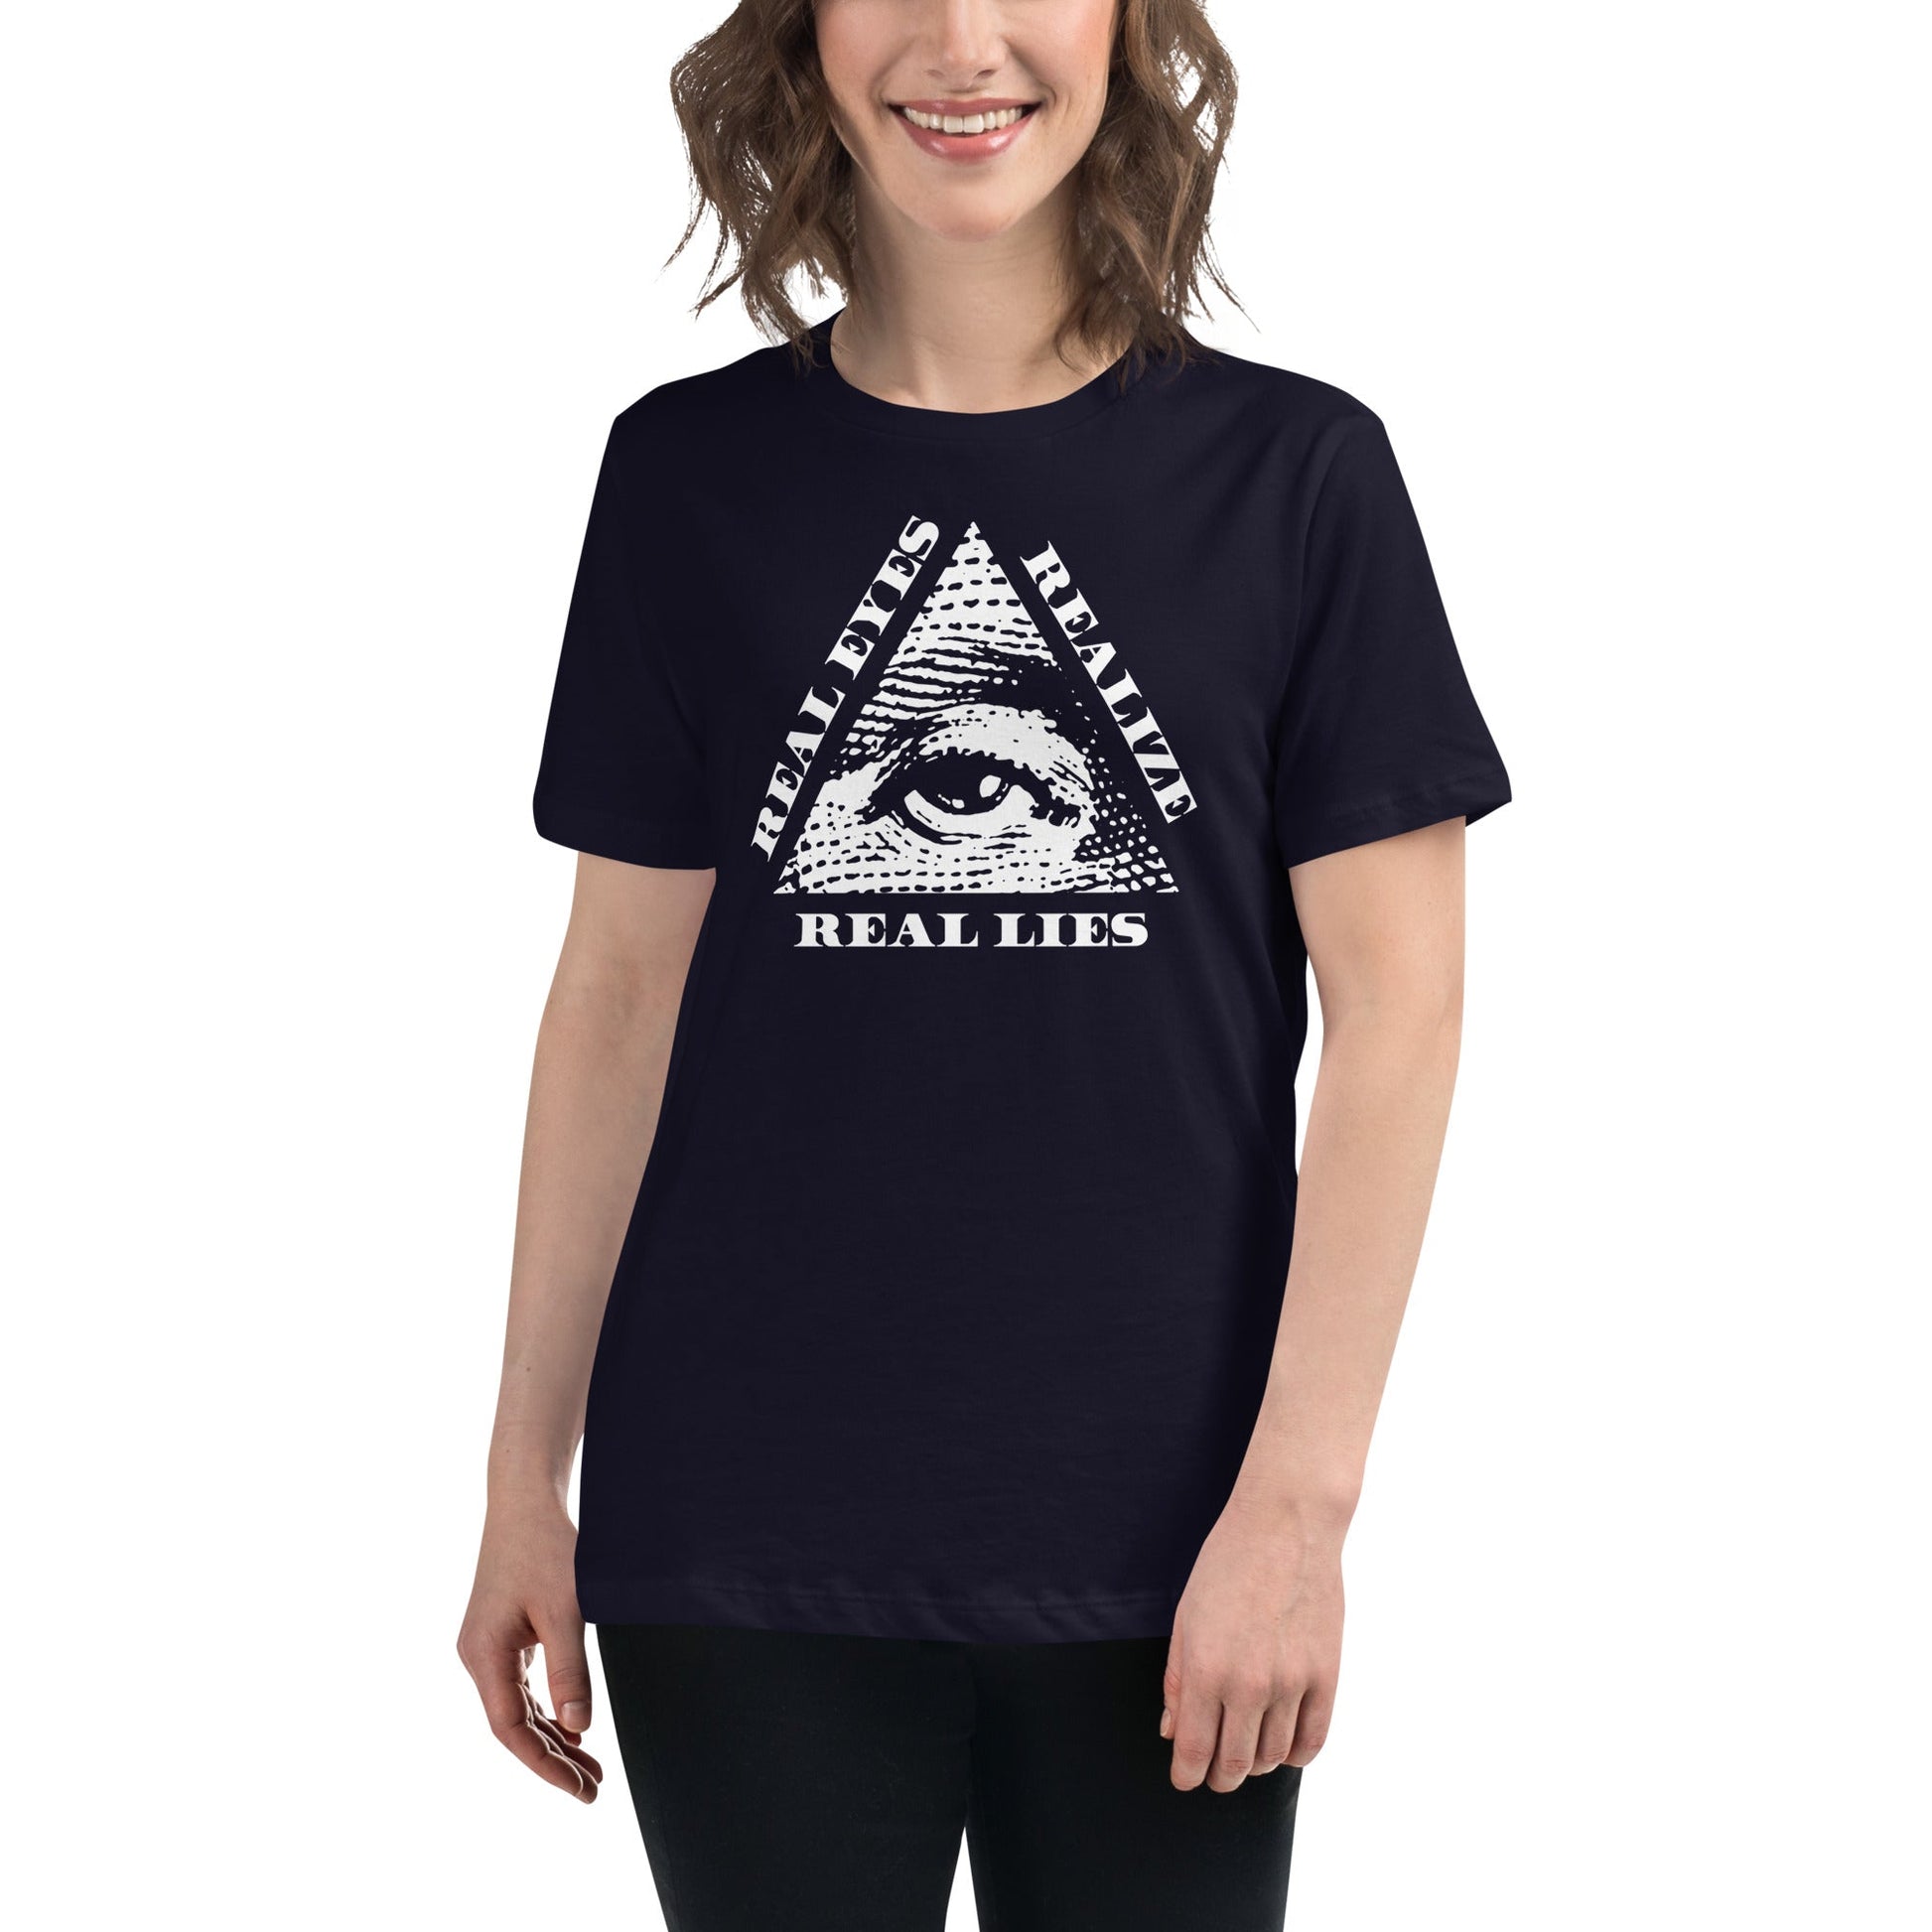 Real Eyes Realize Real Lies - All seeing eye - Women's T-Shirt